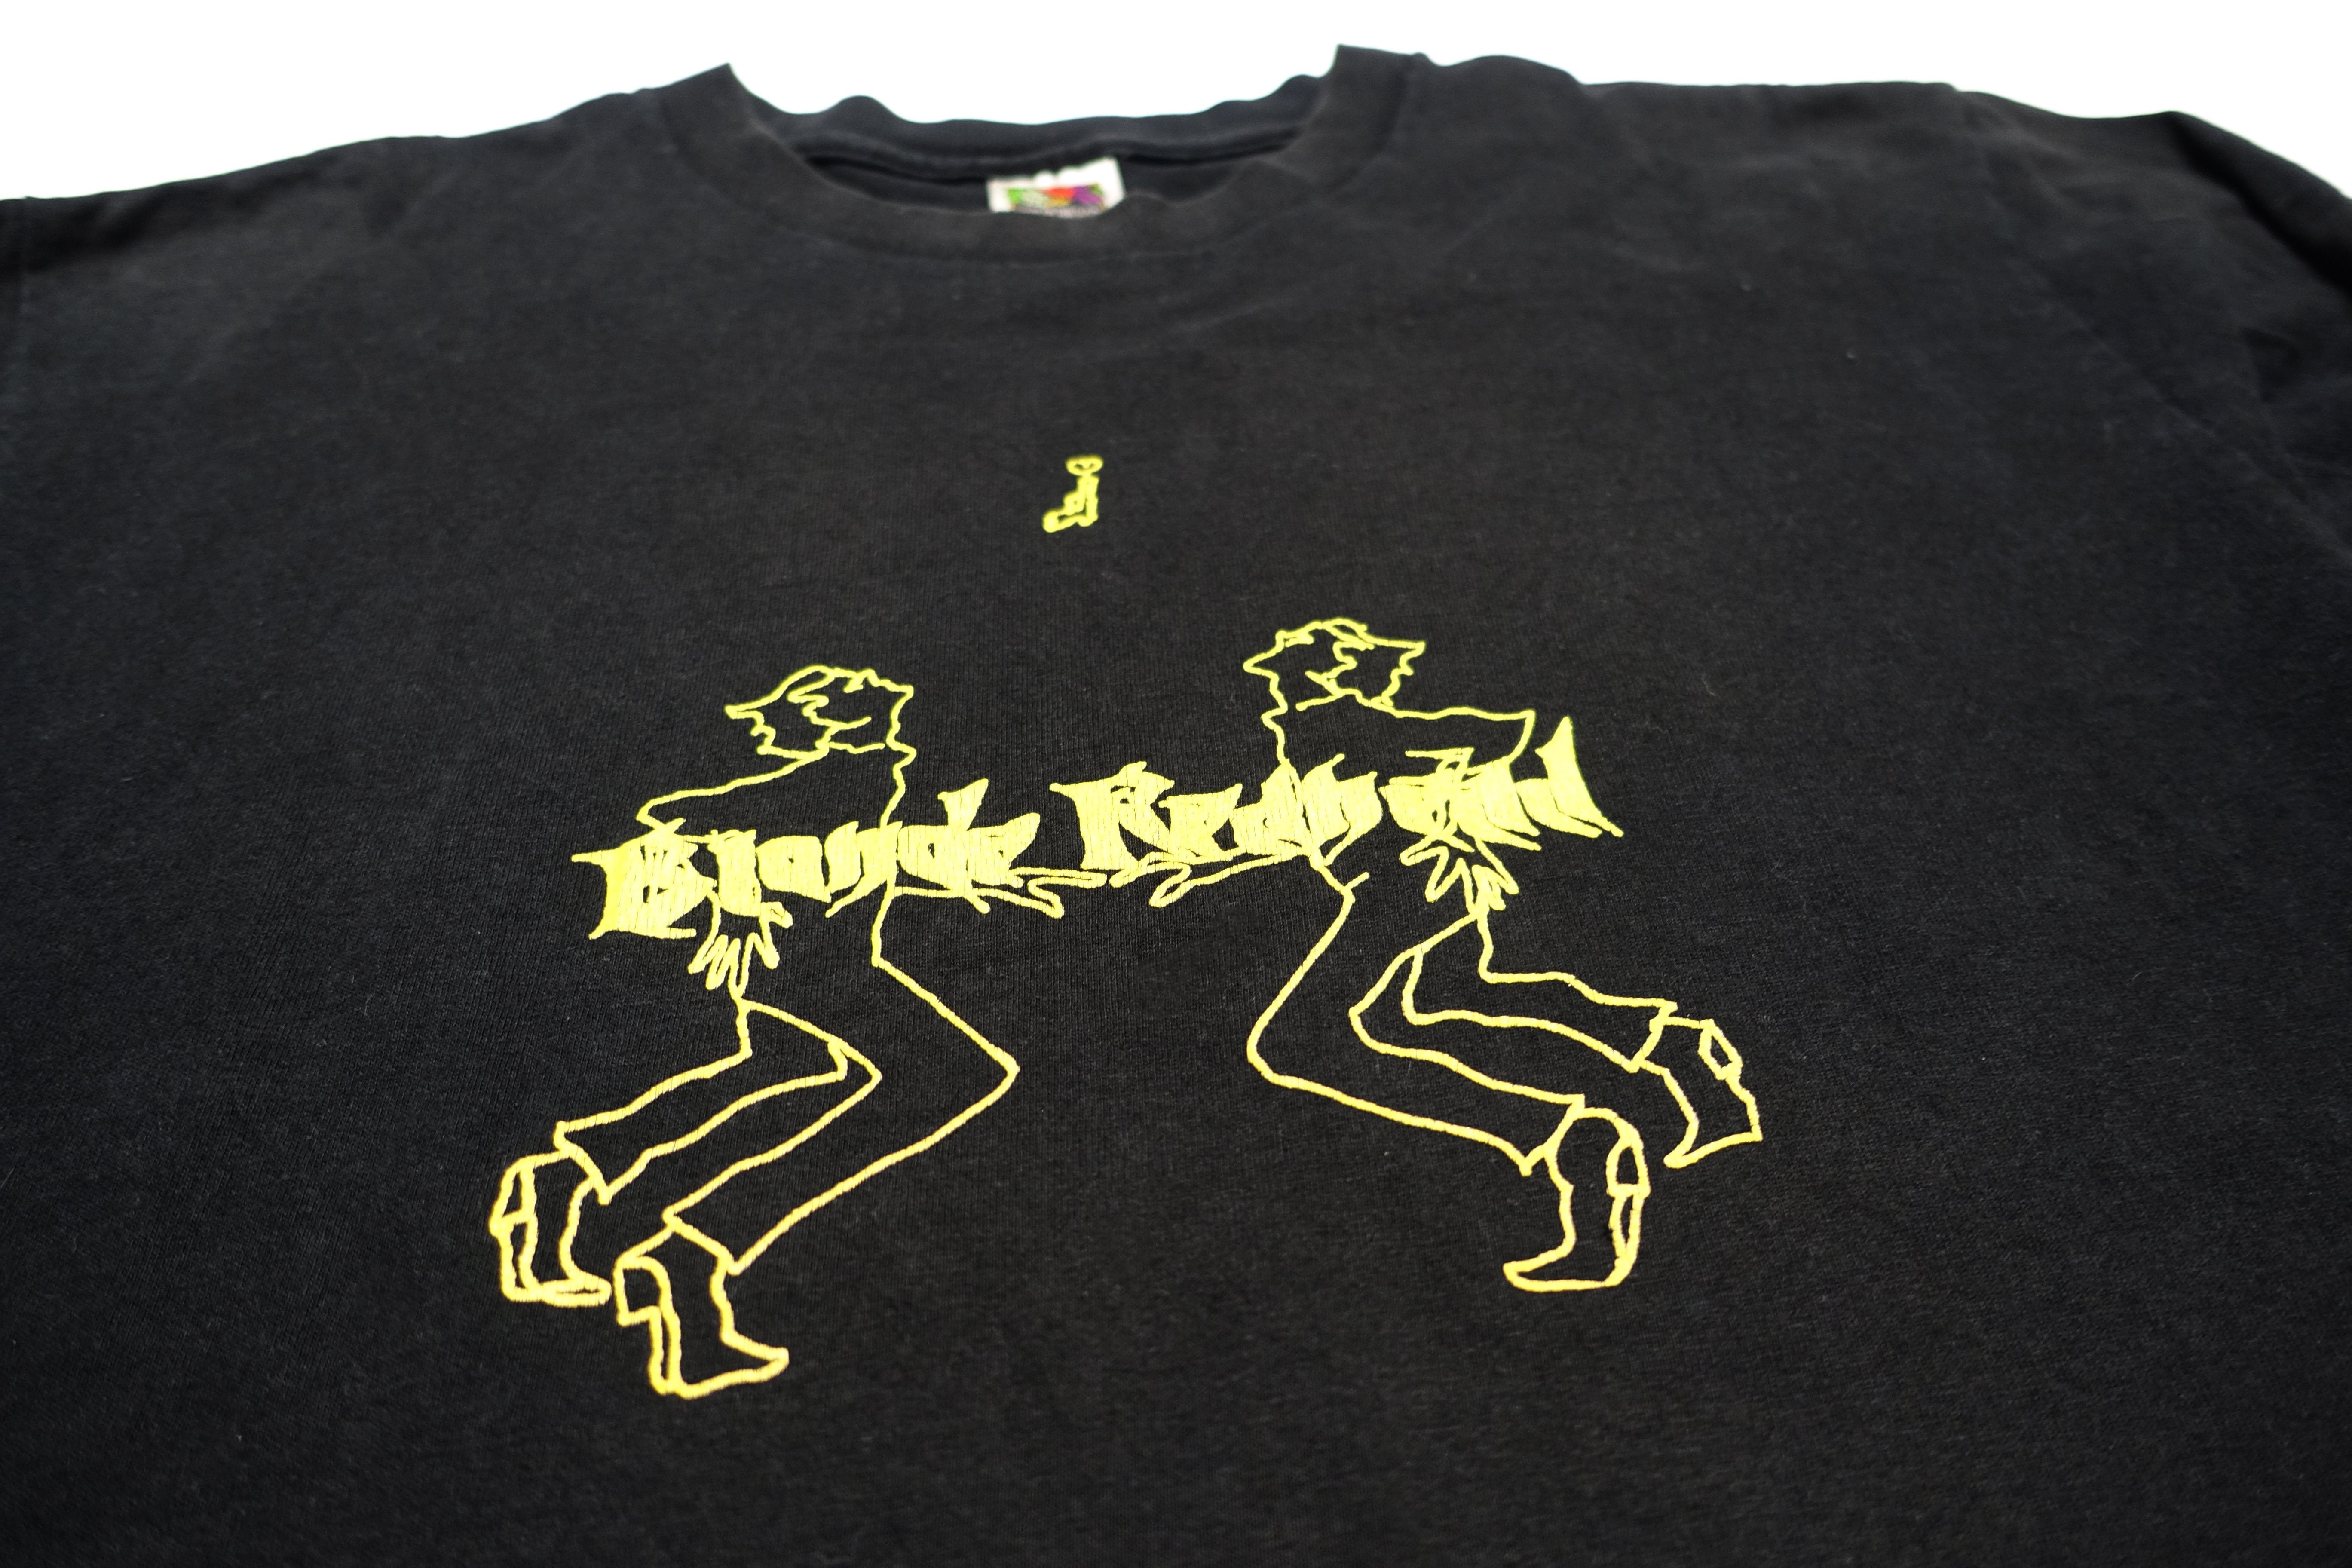 Blonde Redhead - Two People 2000? Tour Shirt Size Large